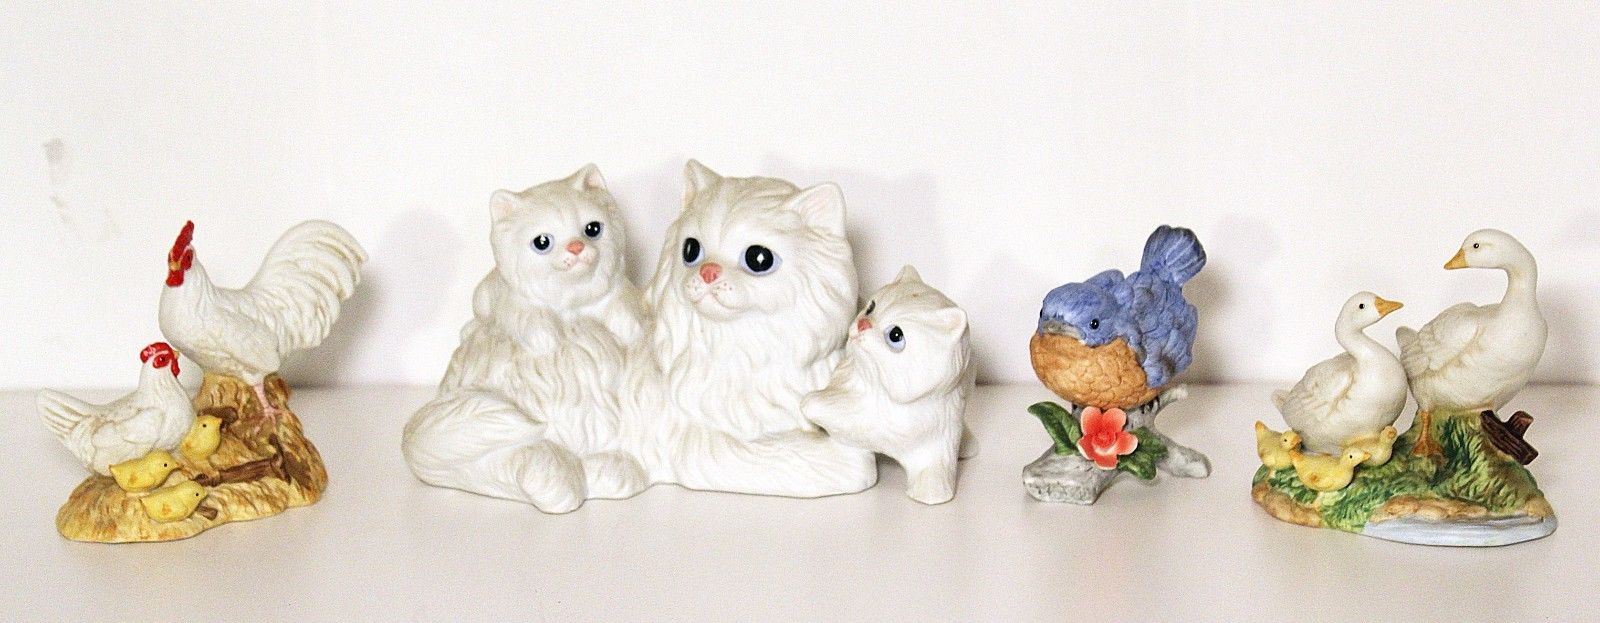 Set of 4 Vintage Homco Hand Painted Porcelain Animal Figurines Birds & Cats